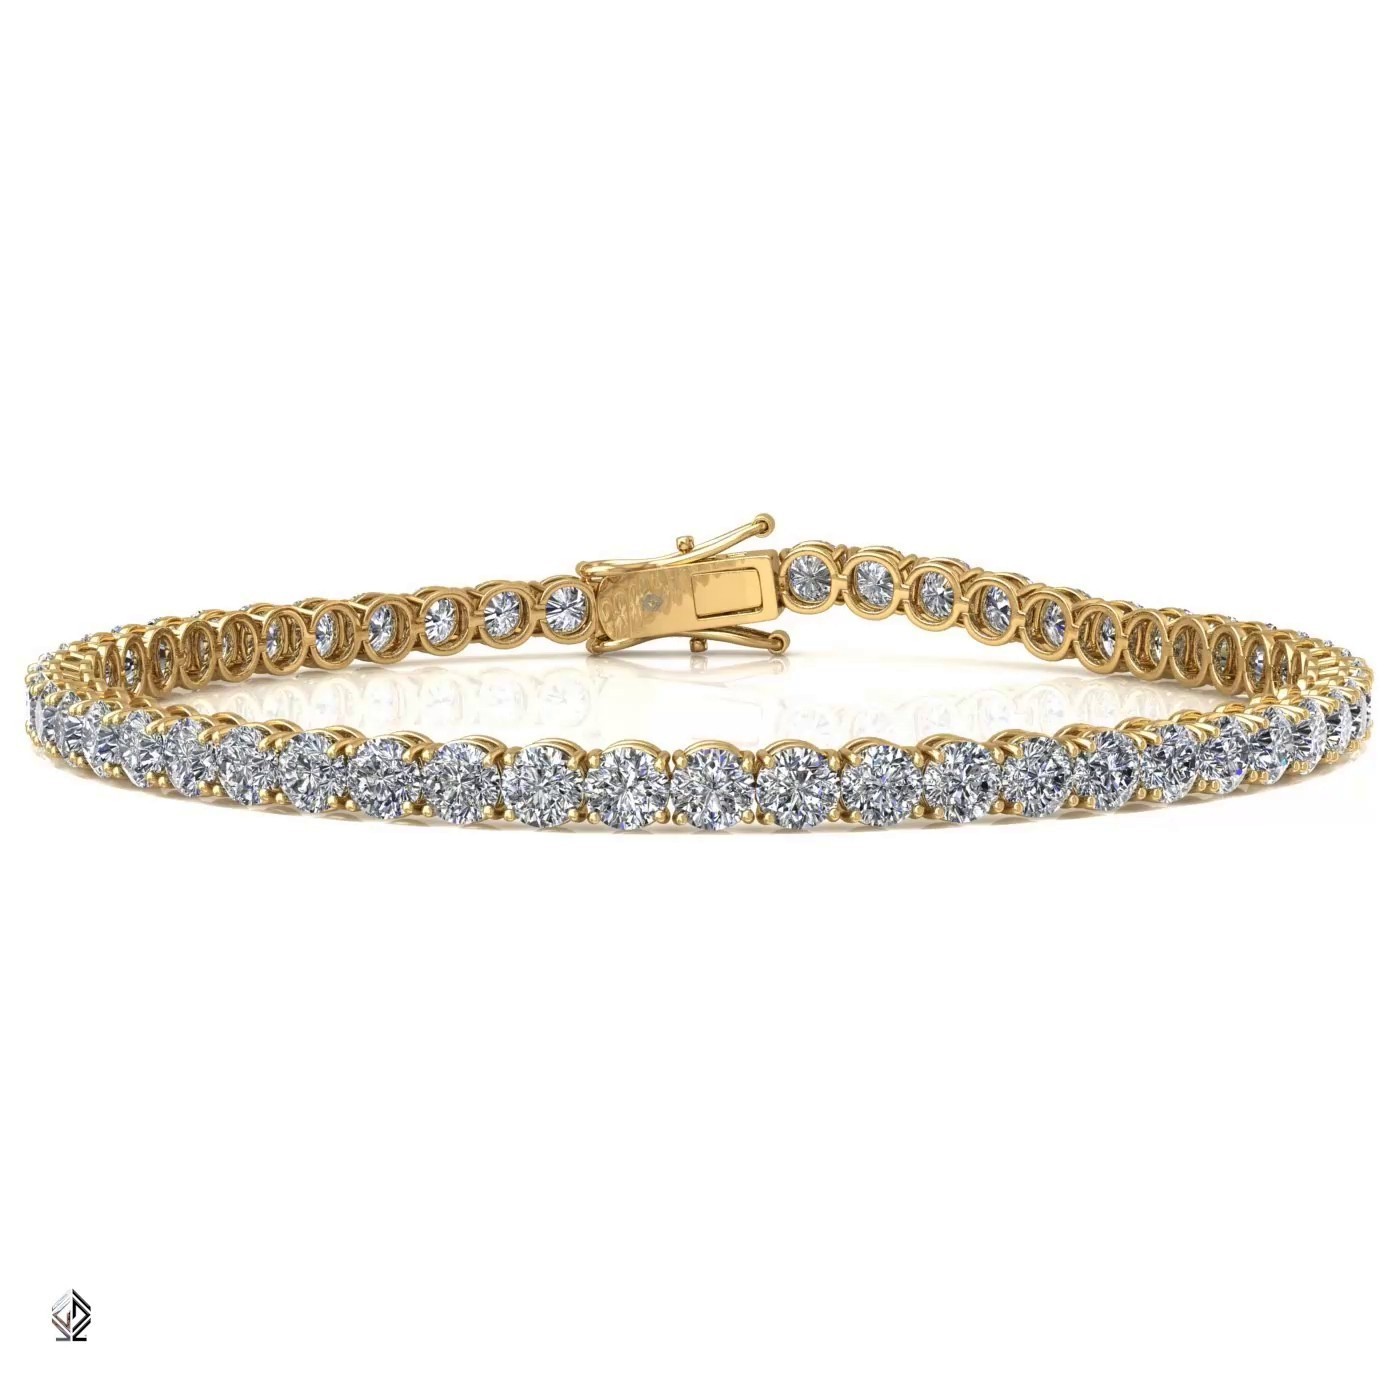 18k yellow gold  1.8mm 4 prong round shape diamond tennis bracelet in round setting Photos & images